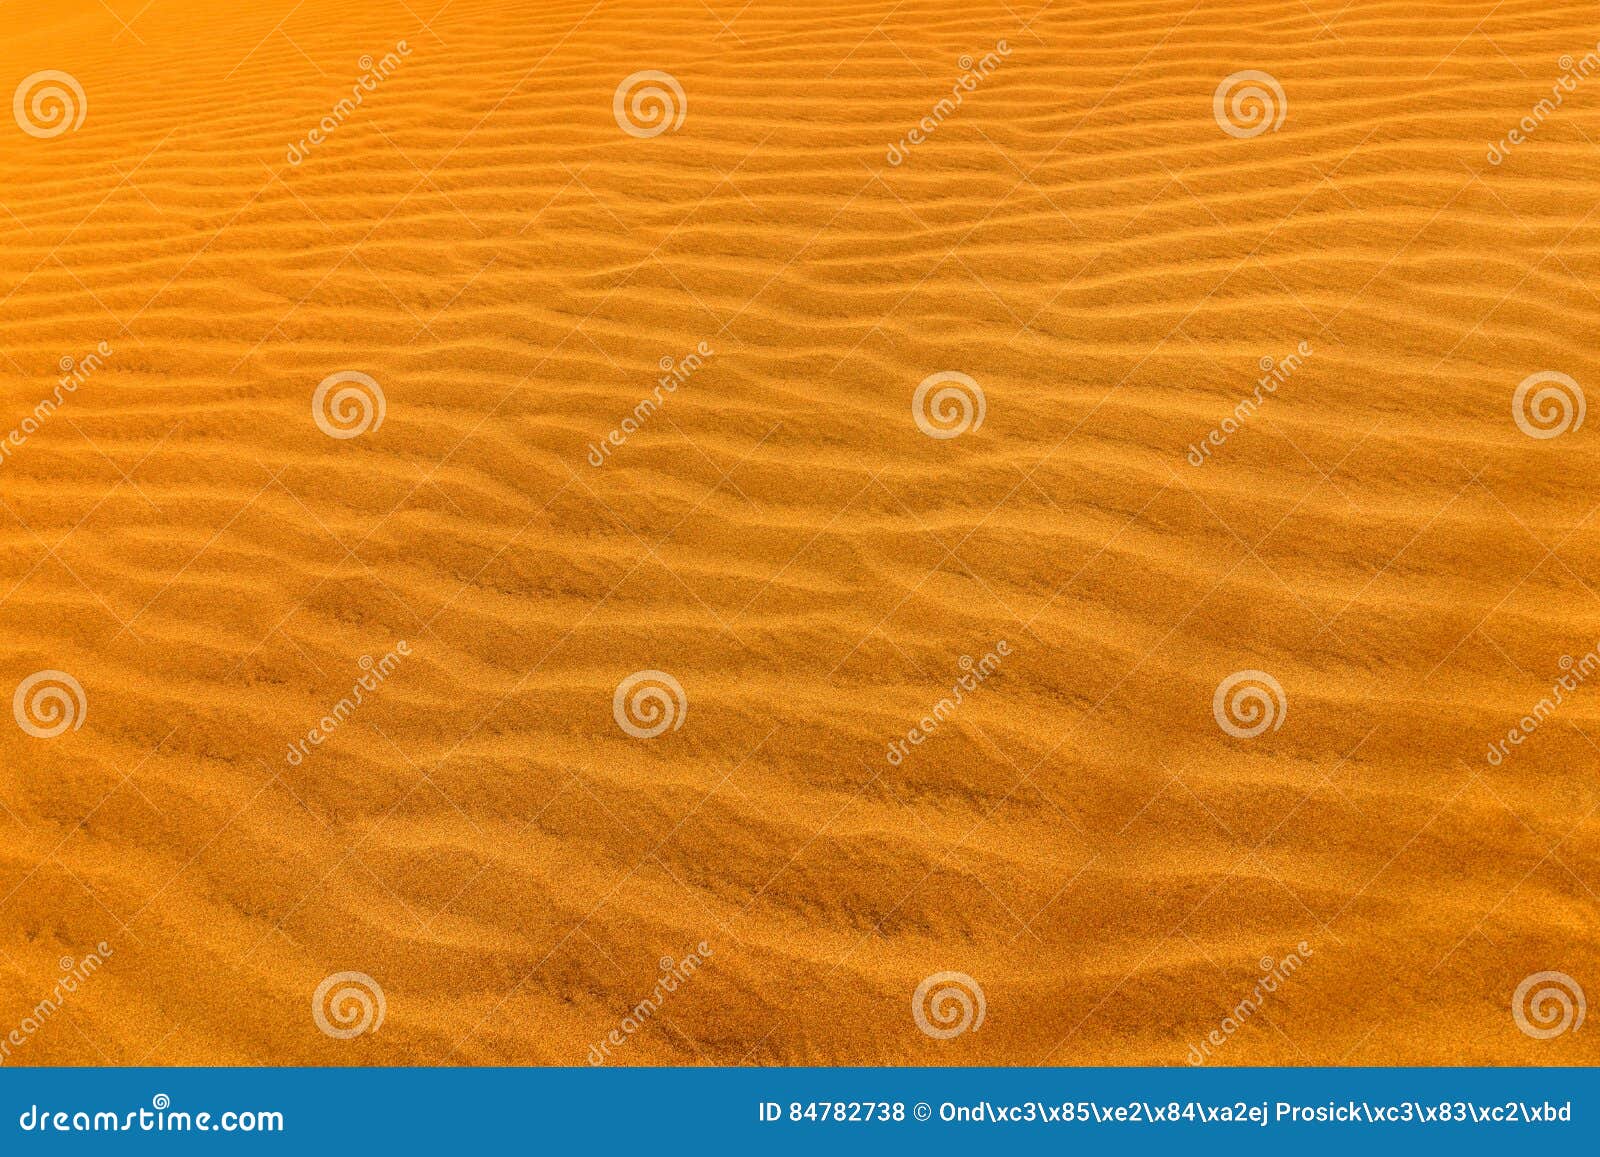 detail of sand dune in desert. summer dry landscape in africa. sand waves in the wild nature. dunas maspalomas, gran canaria, spai